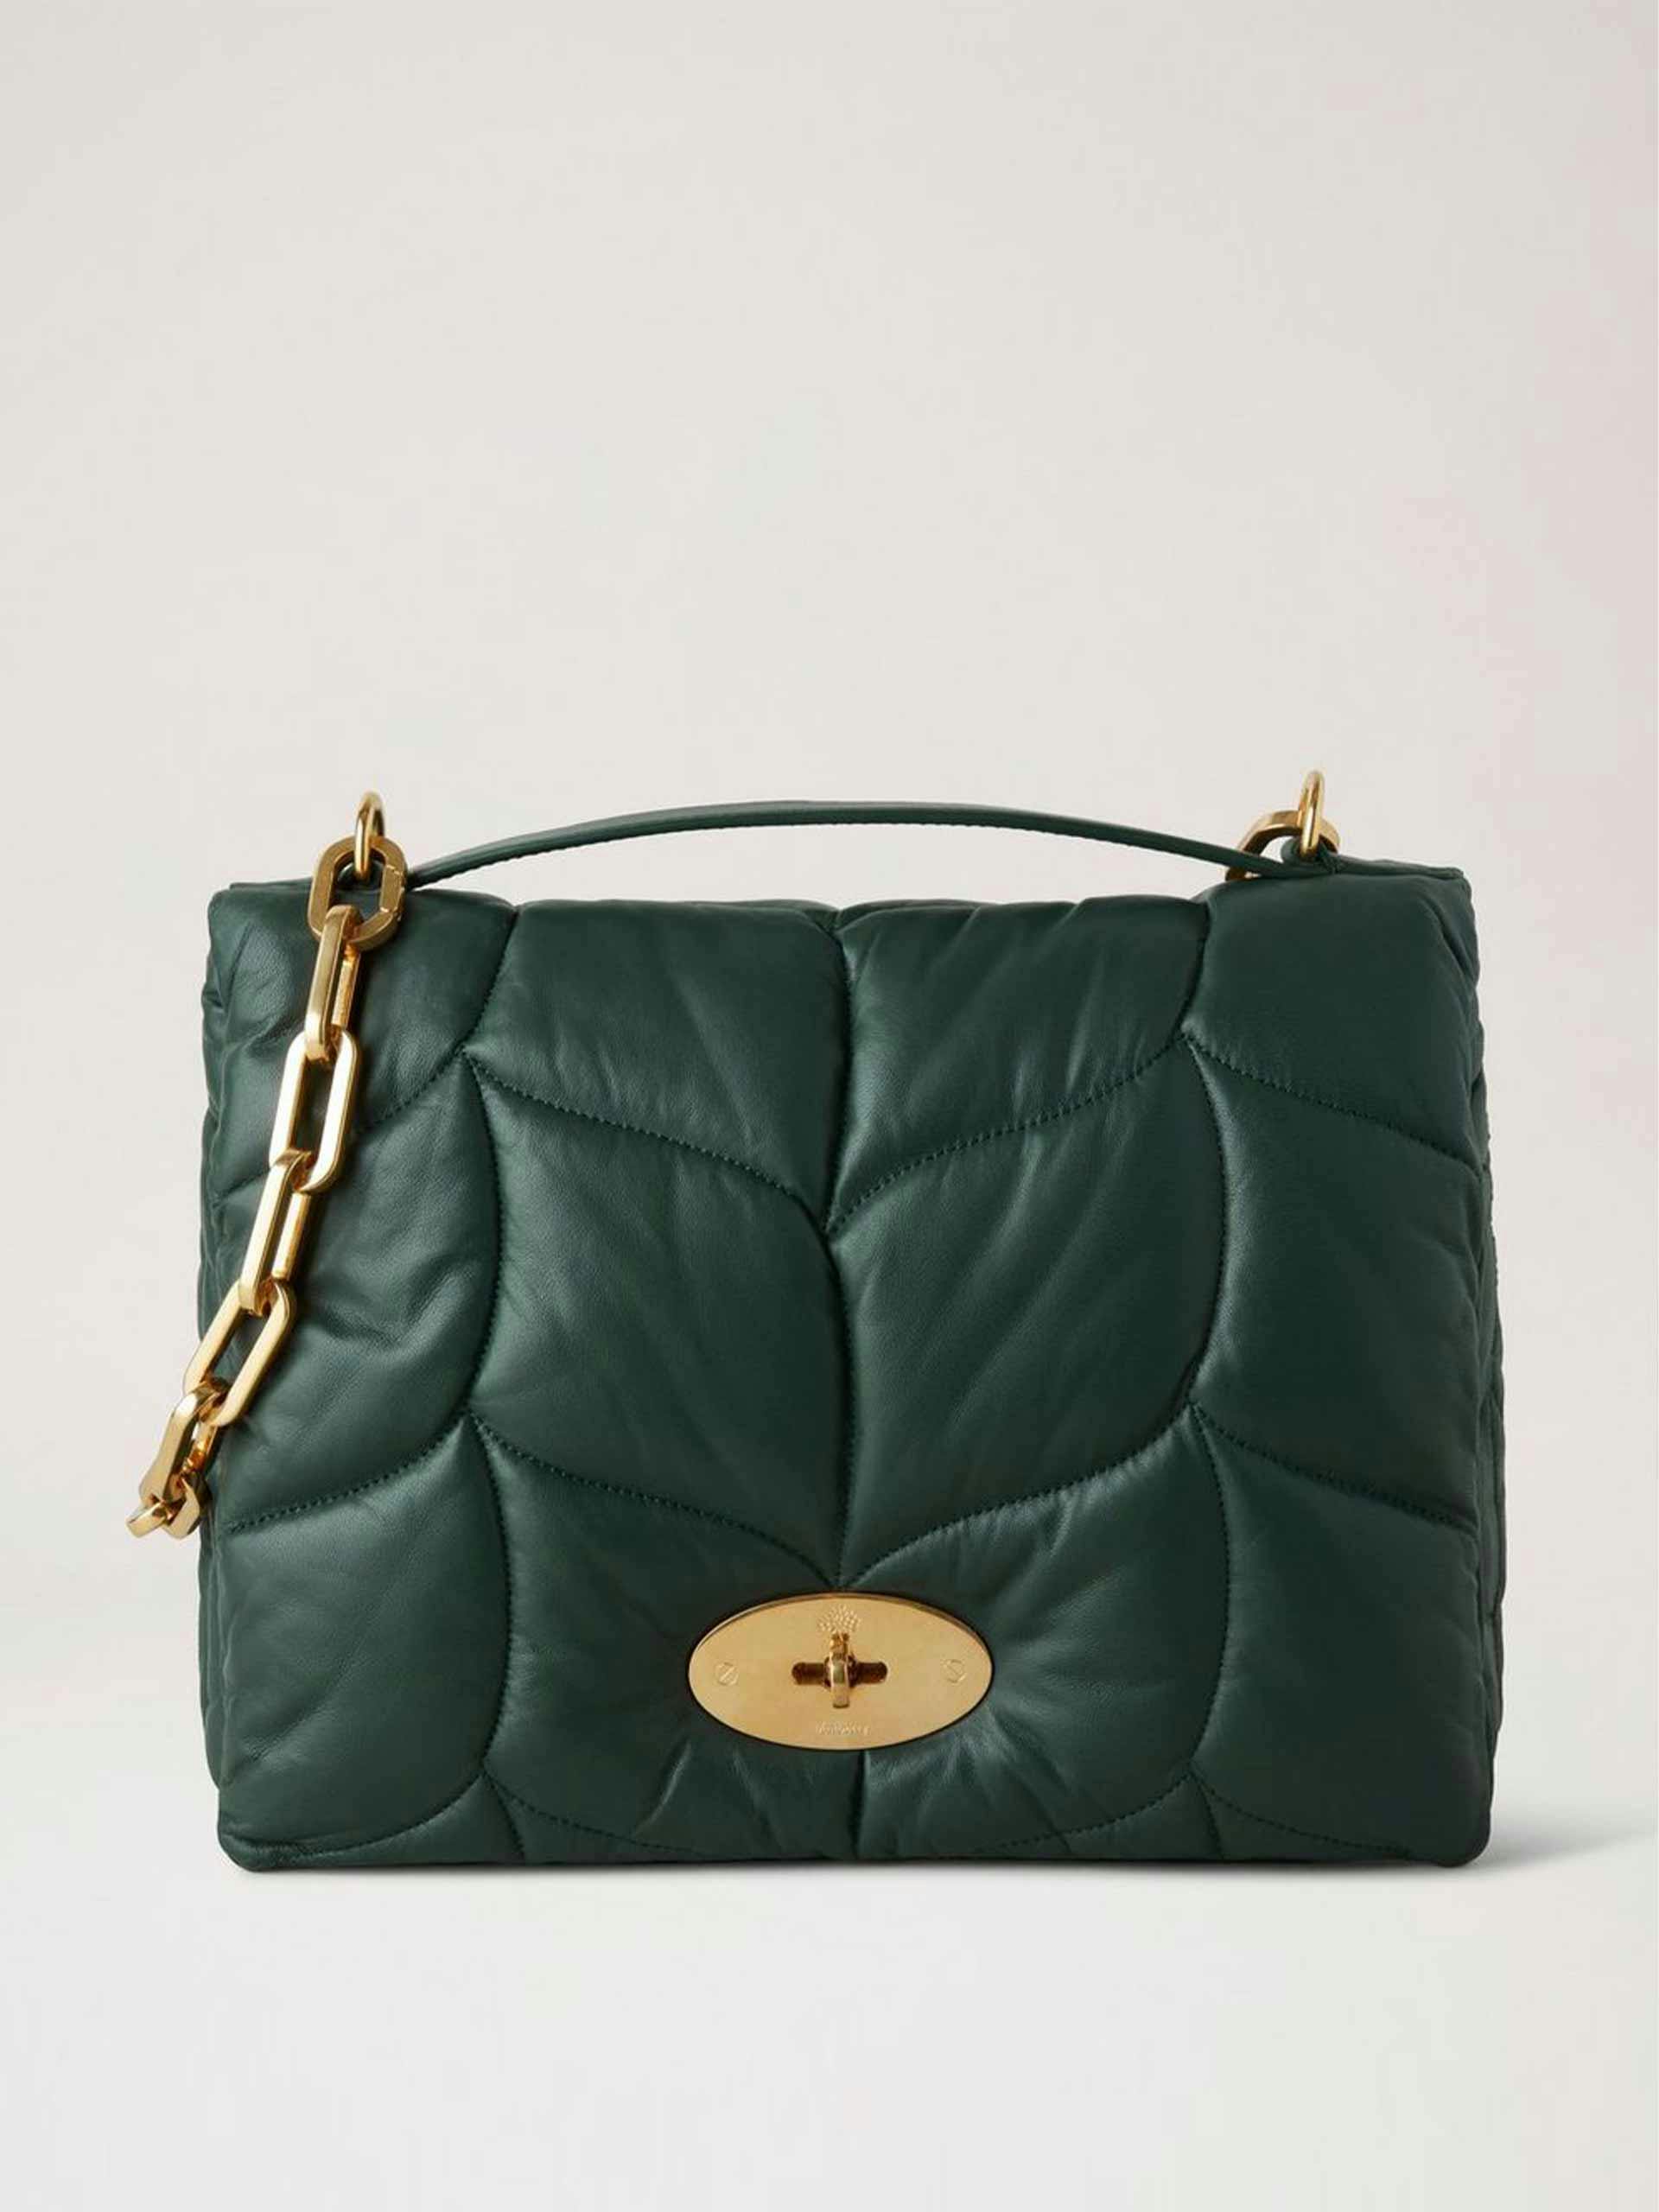 Green leather puffer bag